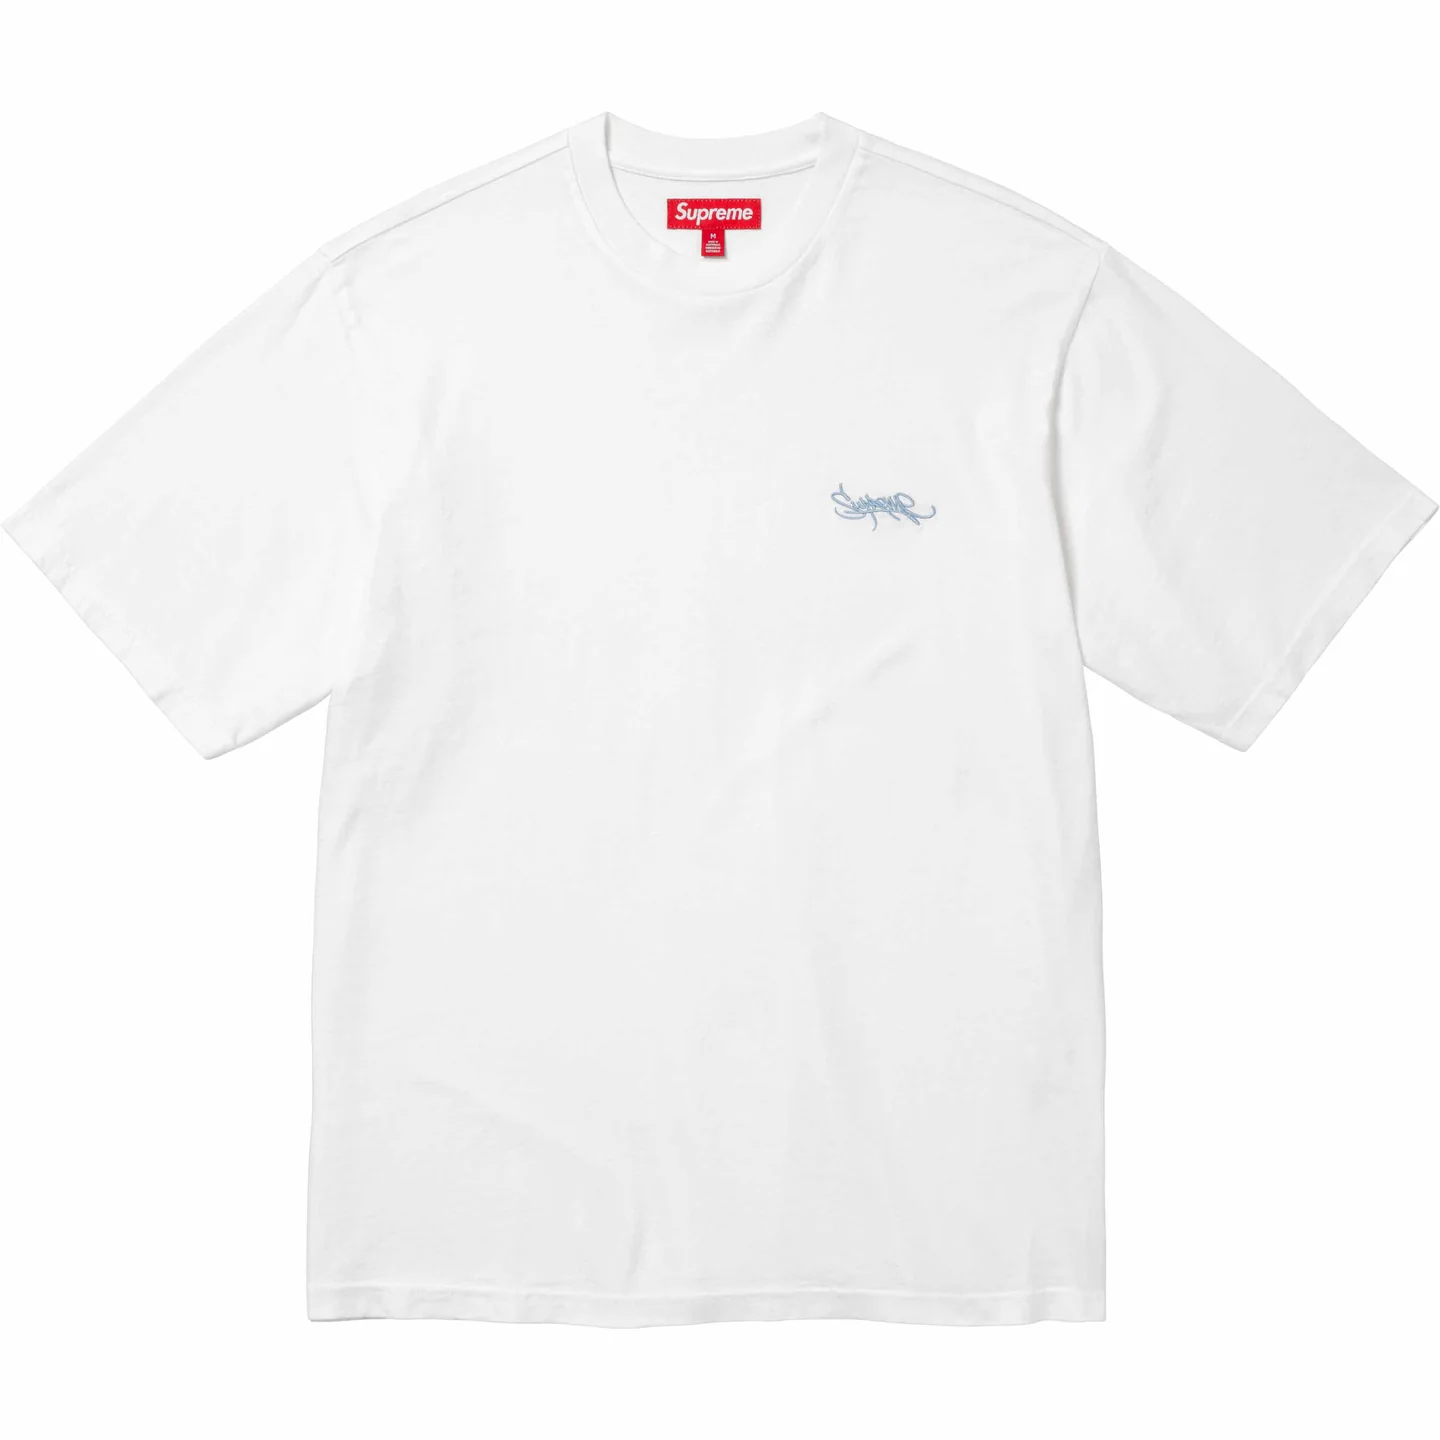 Washed Tag S/S Top | Supreme 24ss